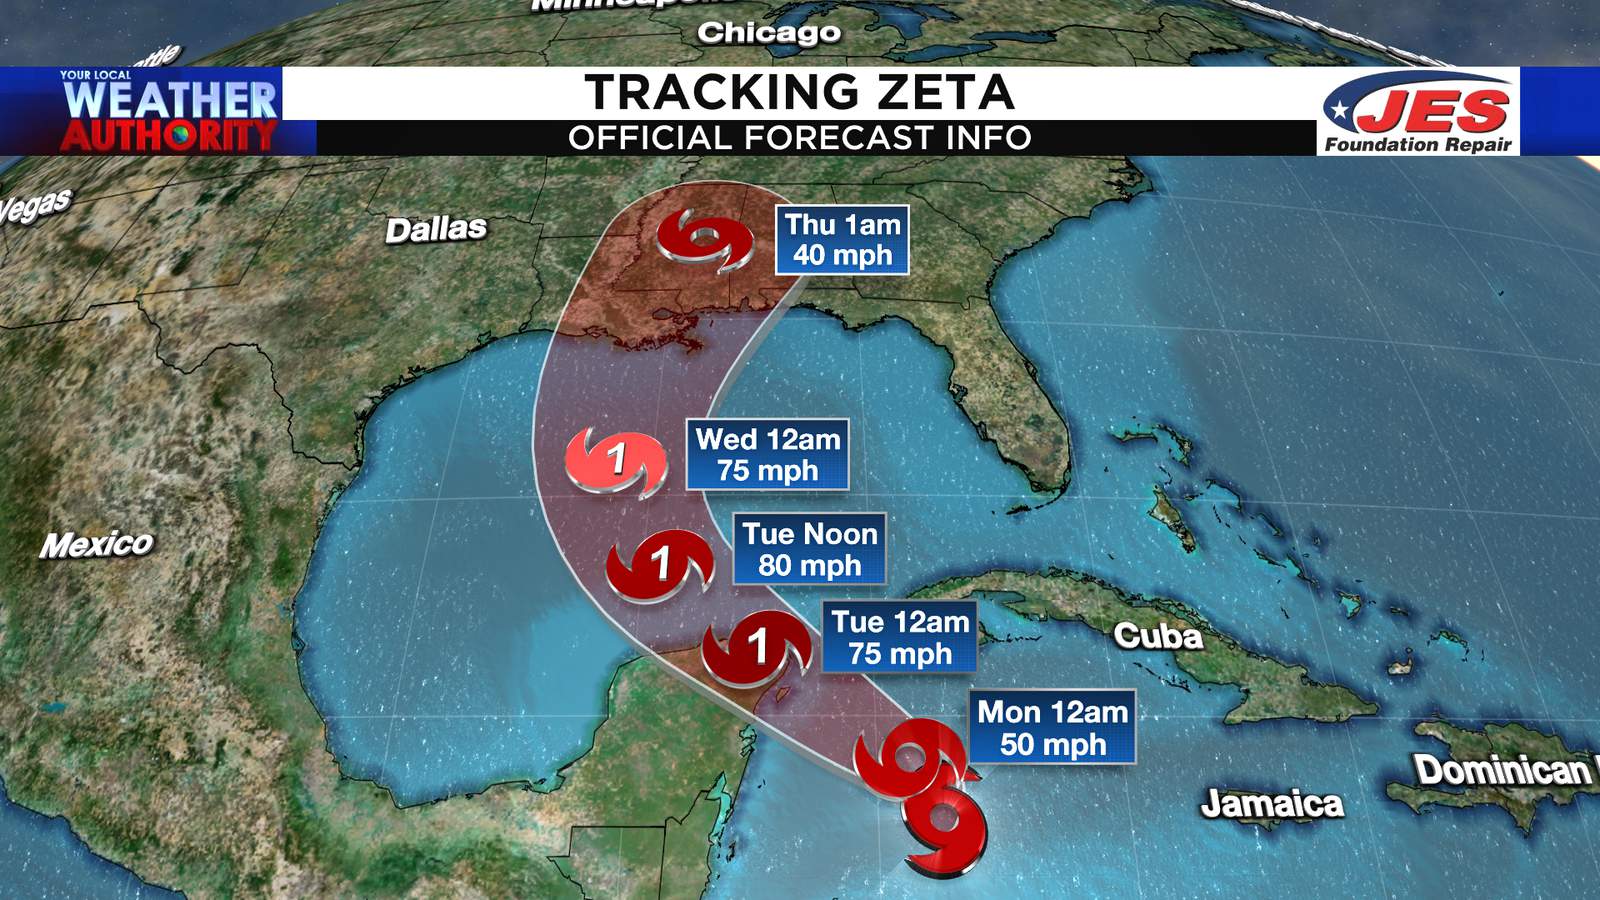 2020 ties 2005 as most active season as Tropical Storm Zeta forms